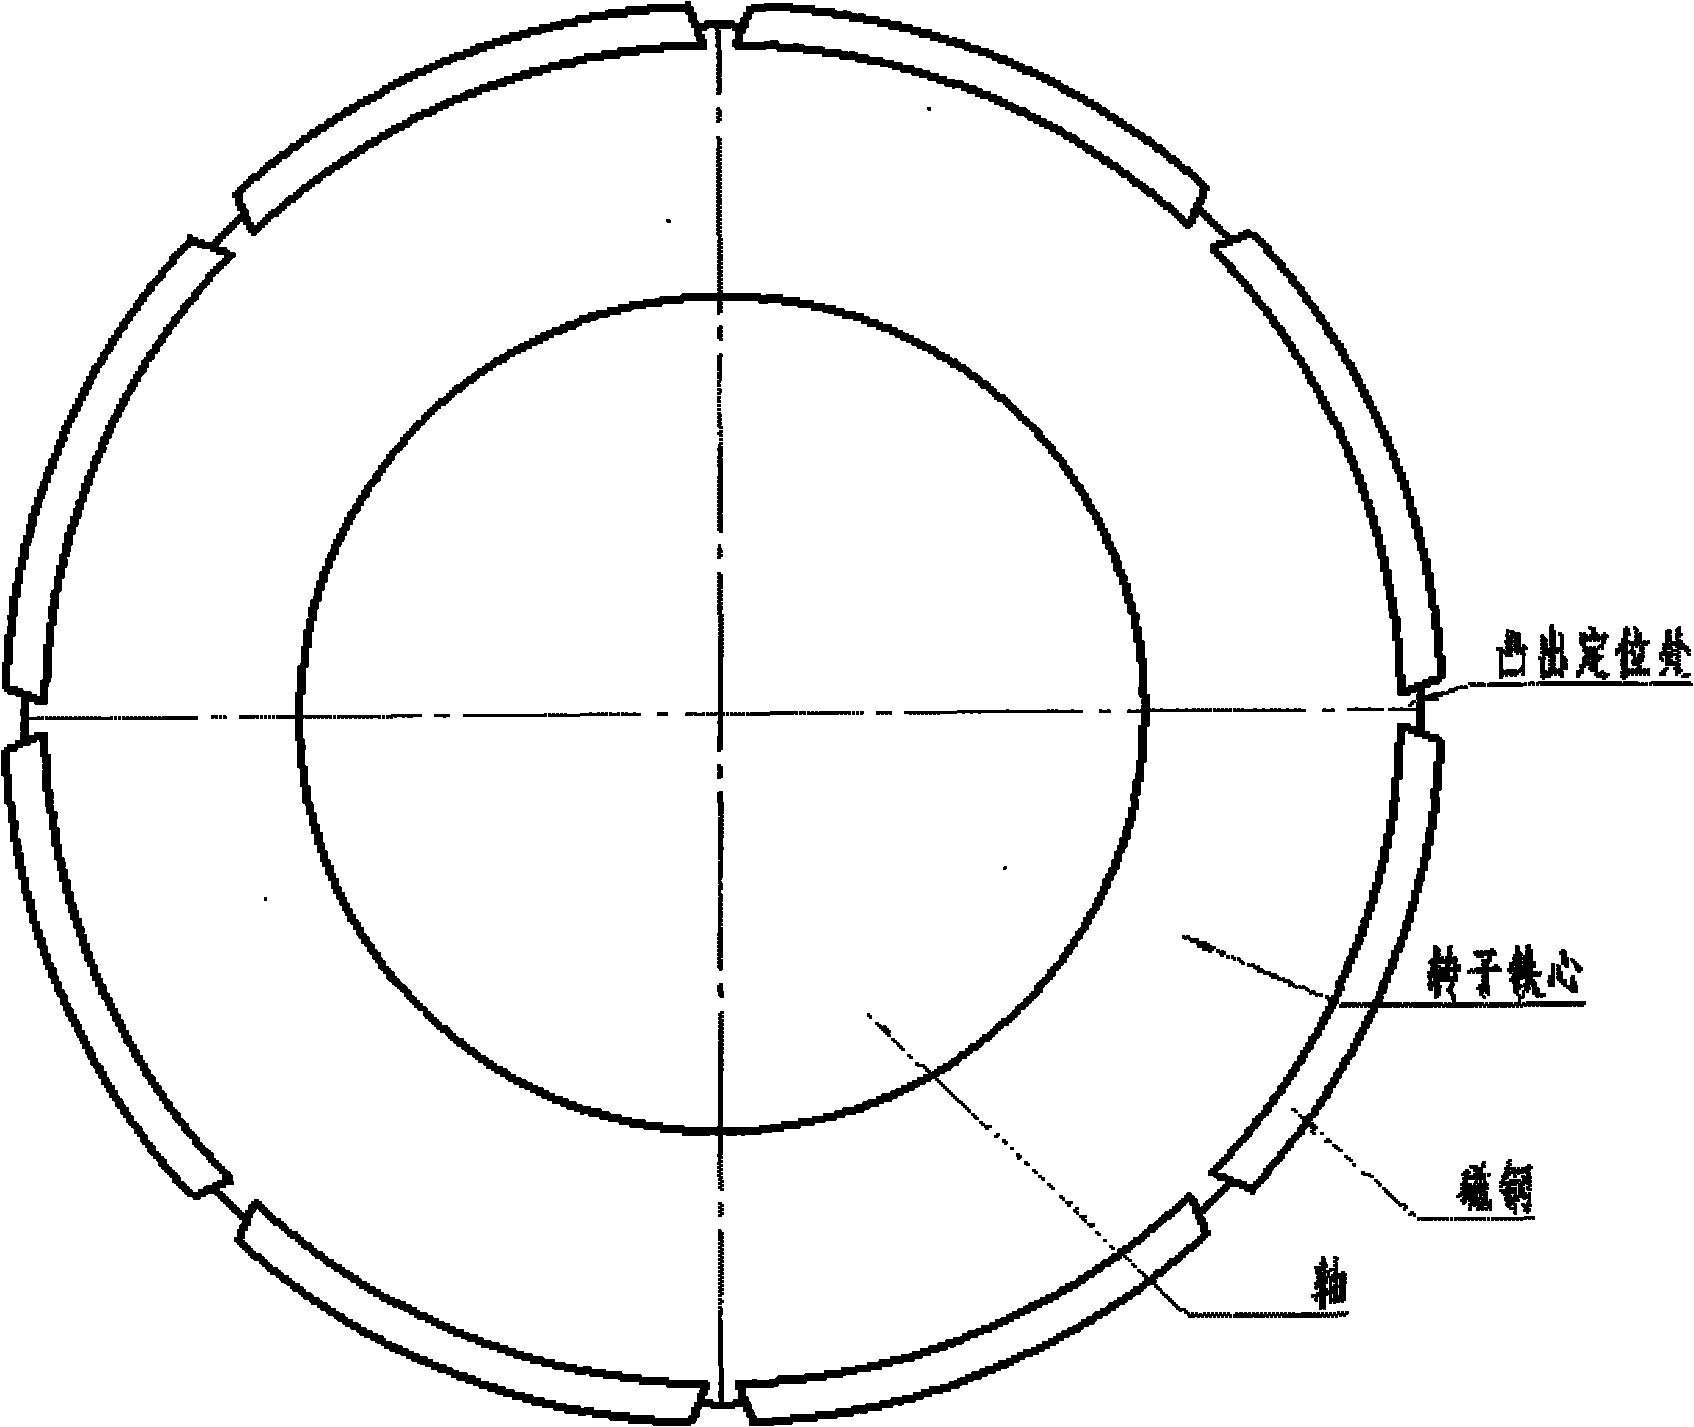 Semi-embedded structure of rotor of permanent magnet synchronous motor